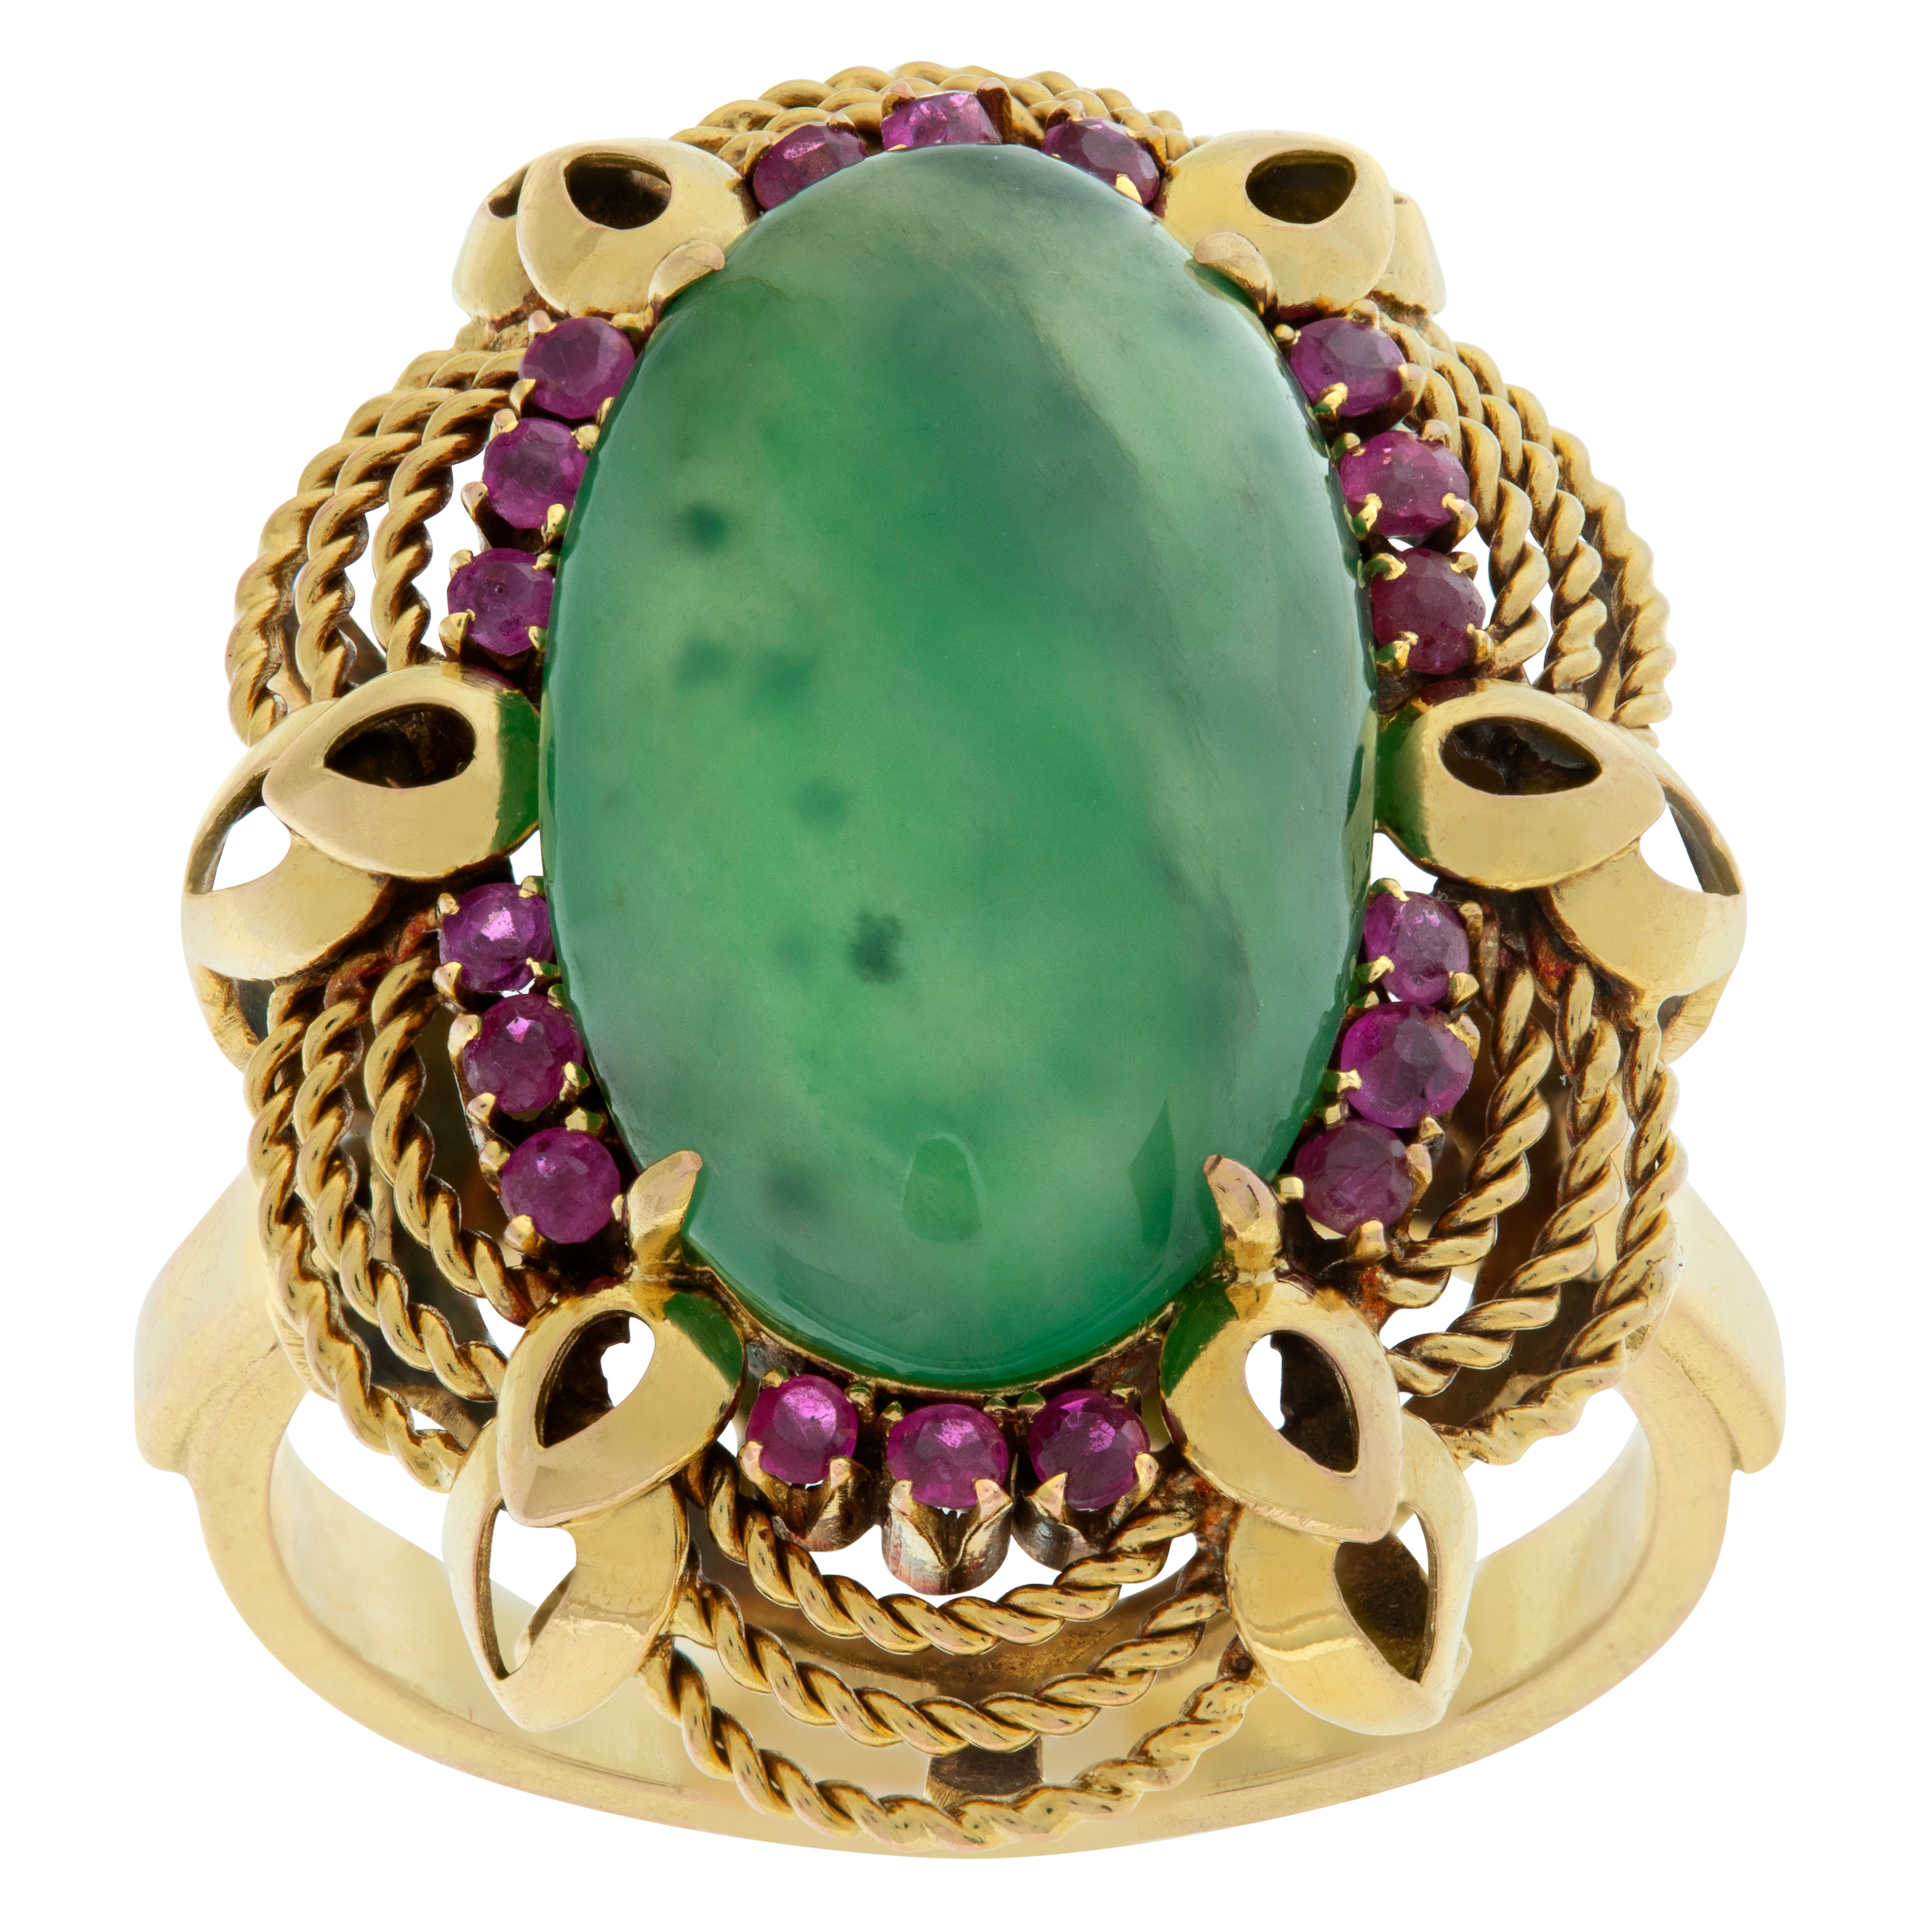 Vintage Oval Cut Cabochon Jade & Rubies Ring In 14k Yellow Gold